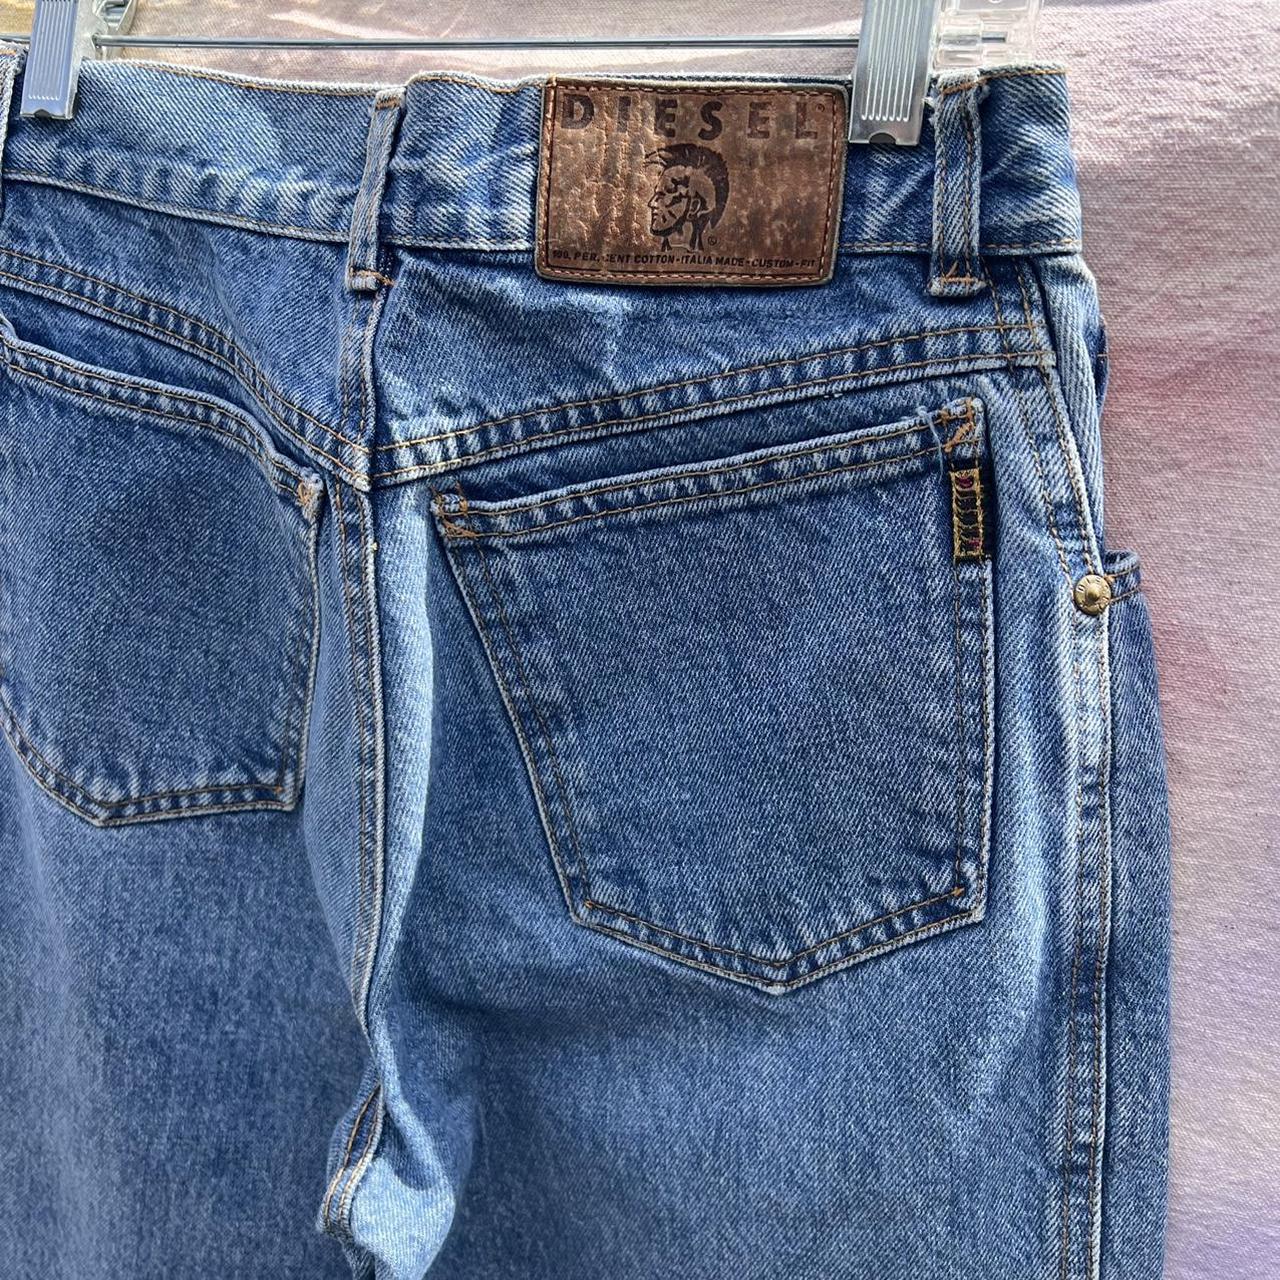 Diesel Denim Jeans Tag size 30”, made in Italy,... - Depop